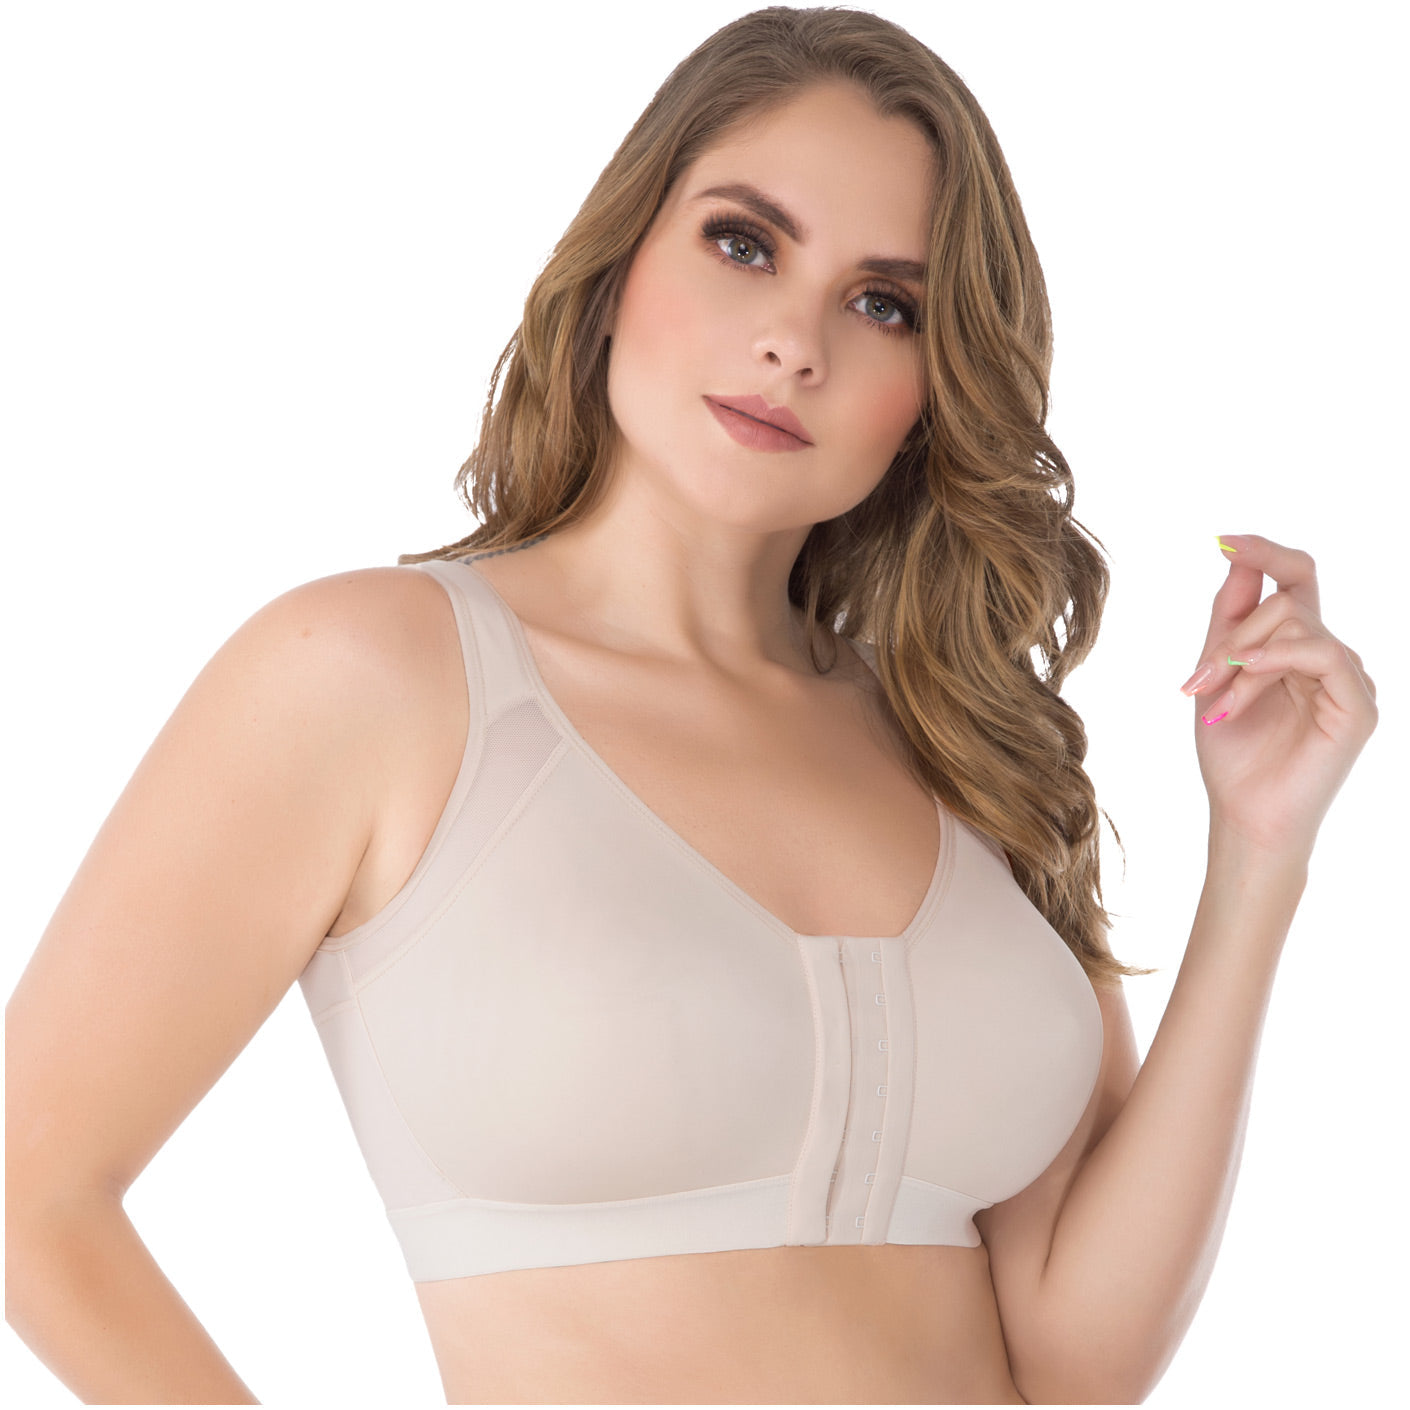 UPlady High Compression Extra Firm Full Cup Shape Push Up Bra Sz